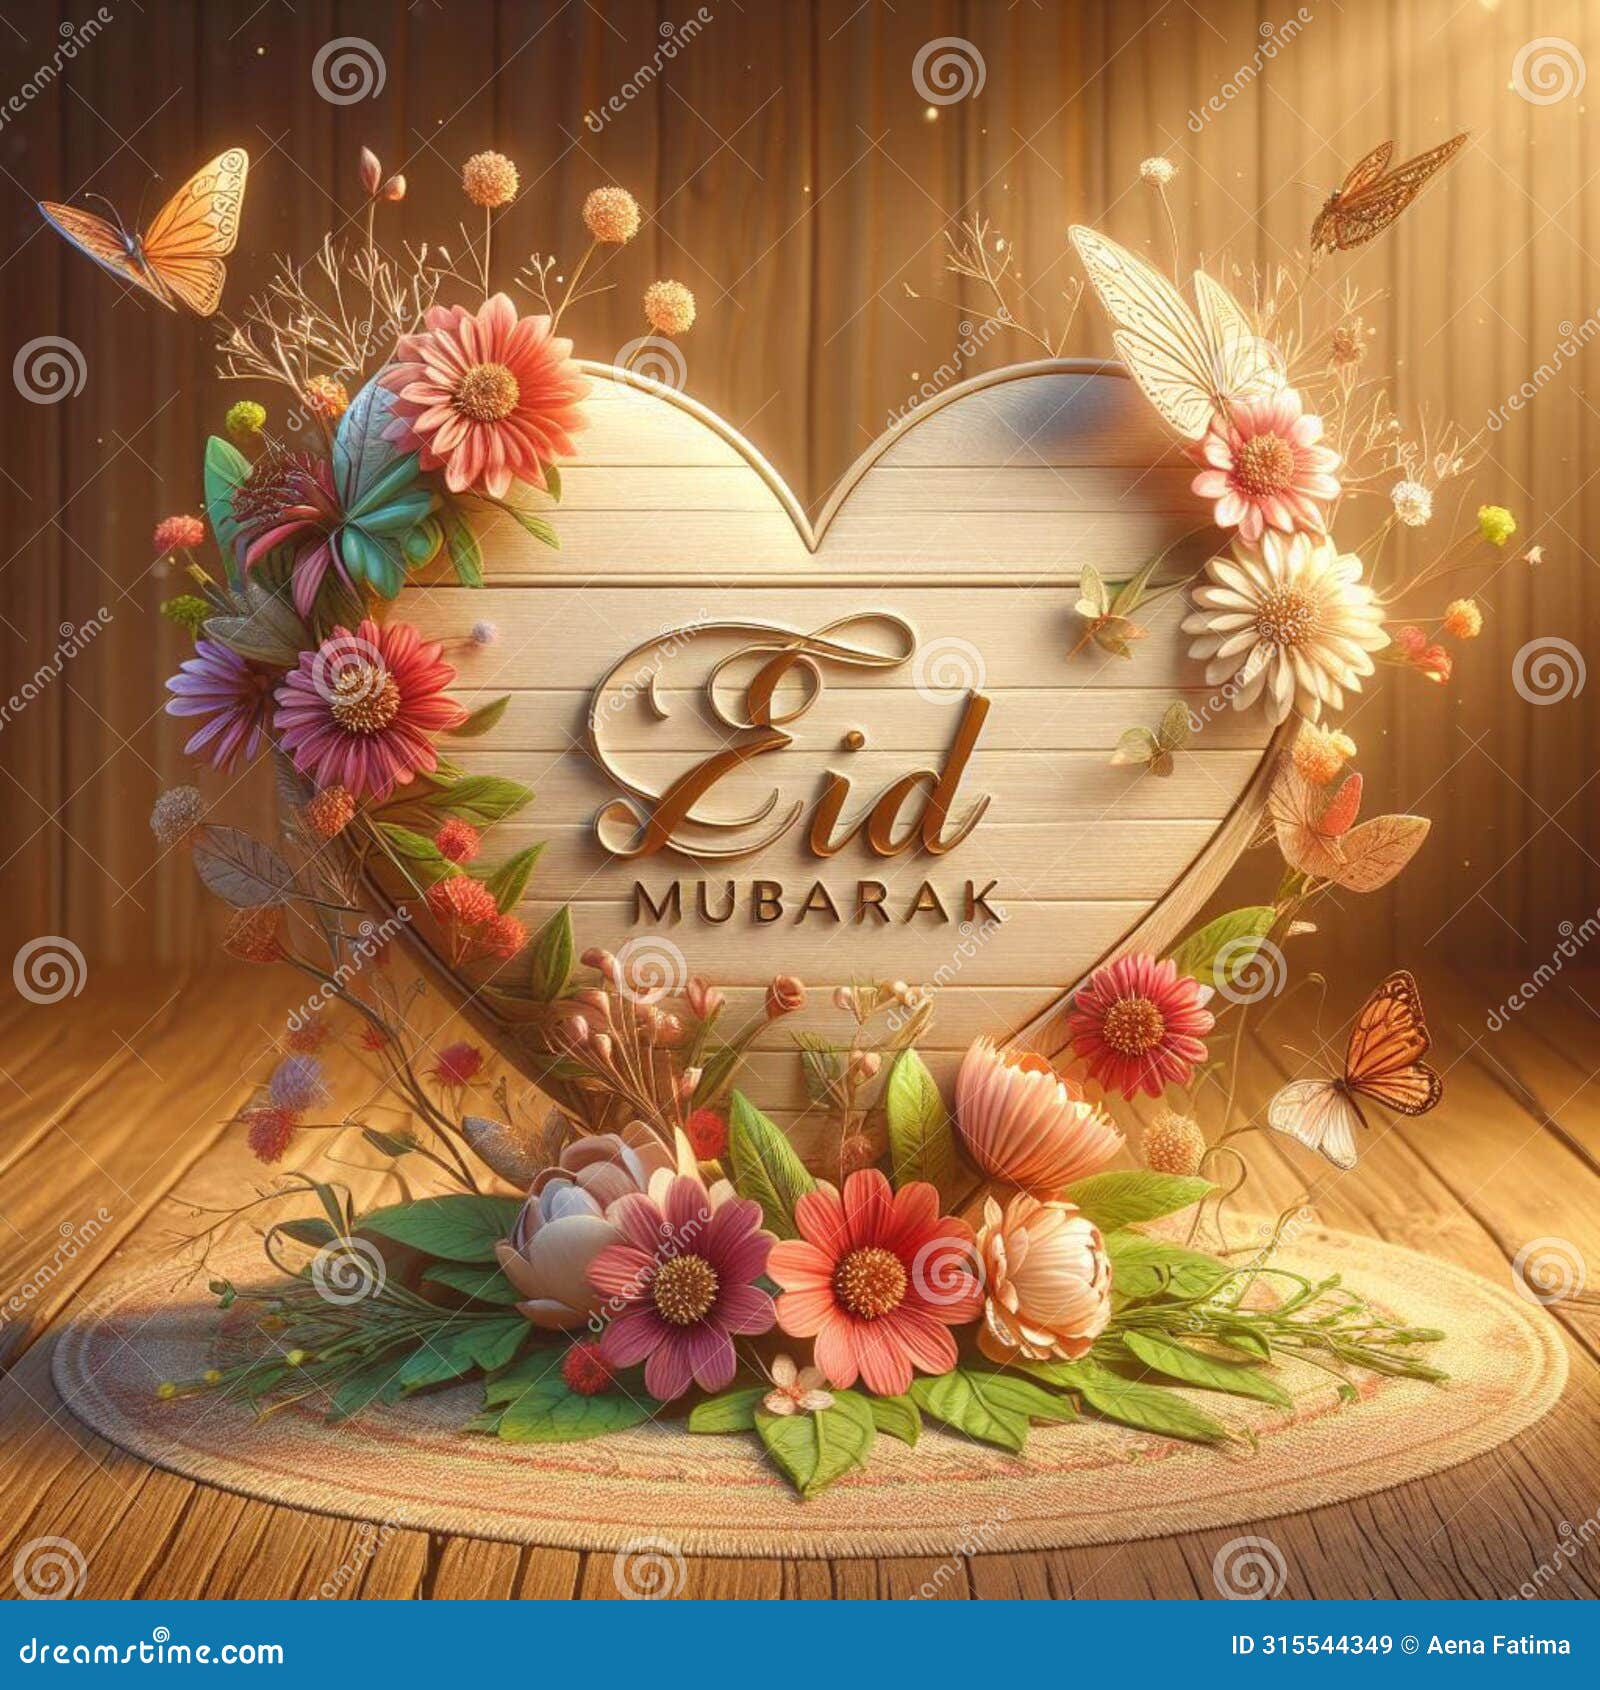 a heartfelt eid mubarak with flowers and a glss heart to be taken care of.